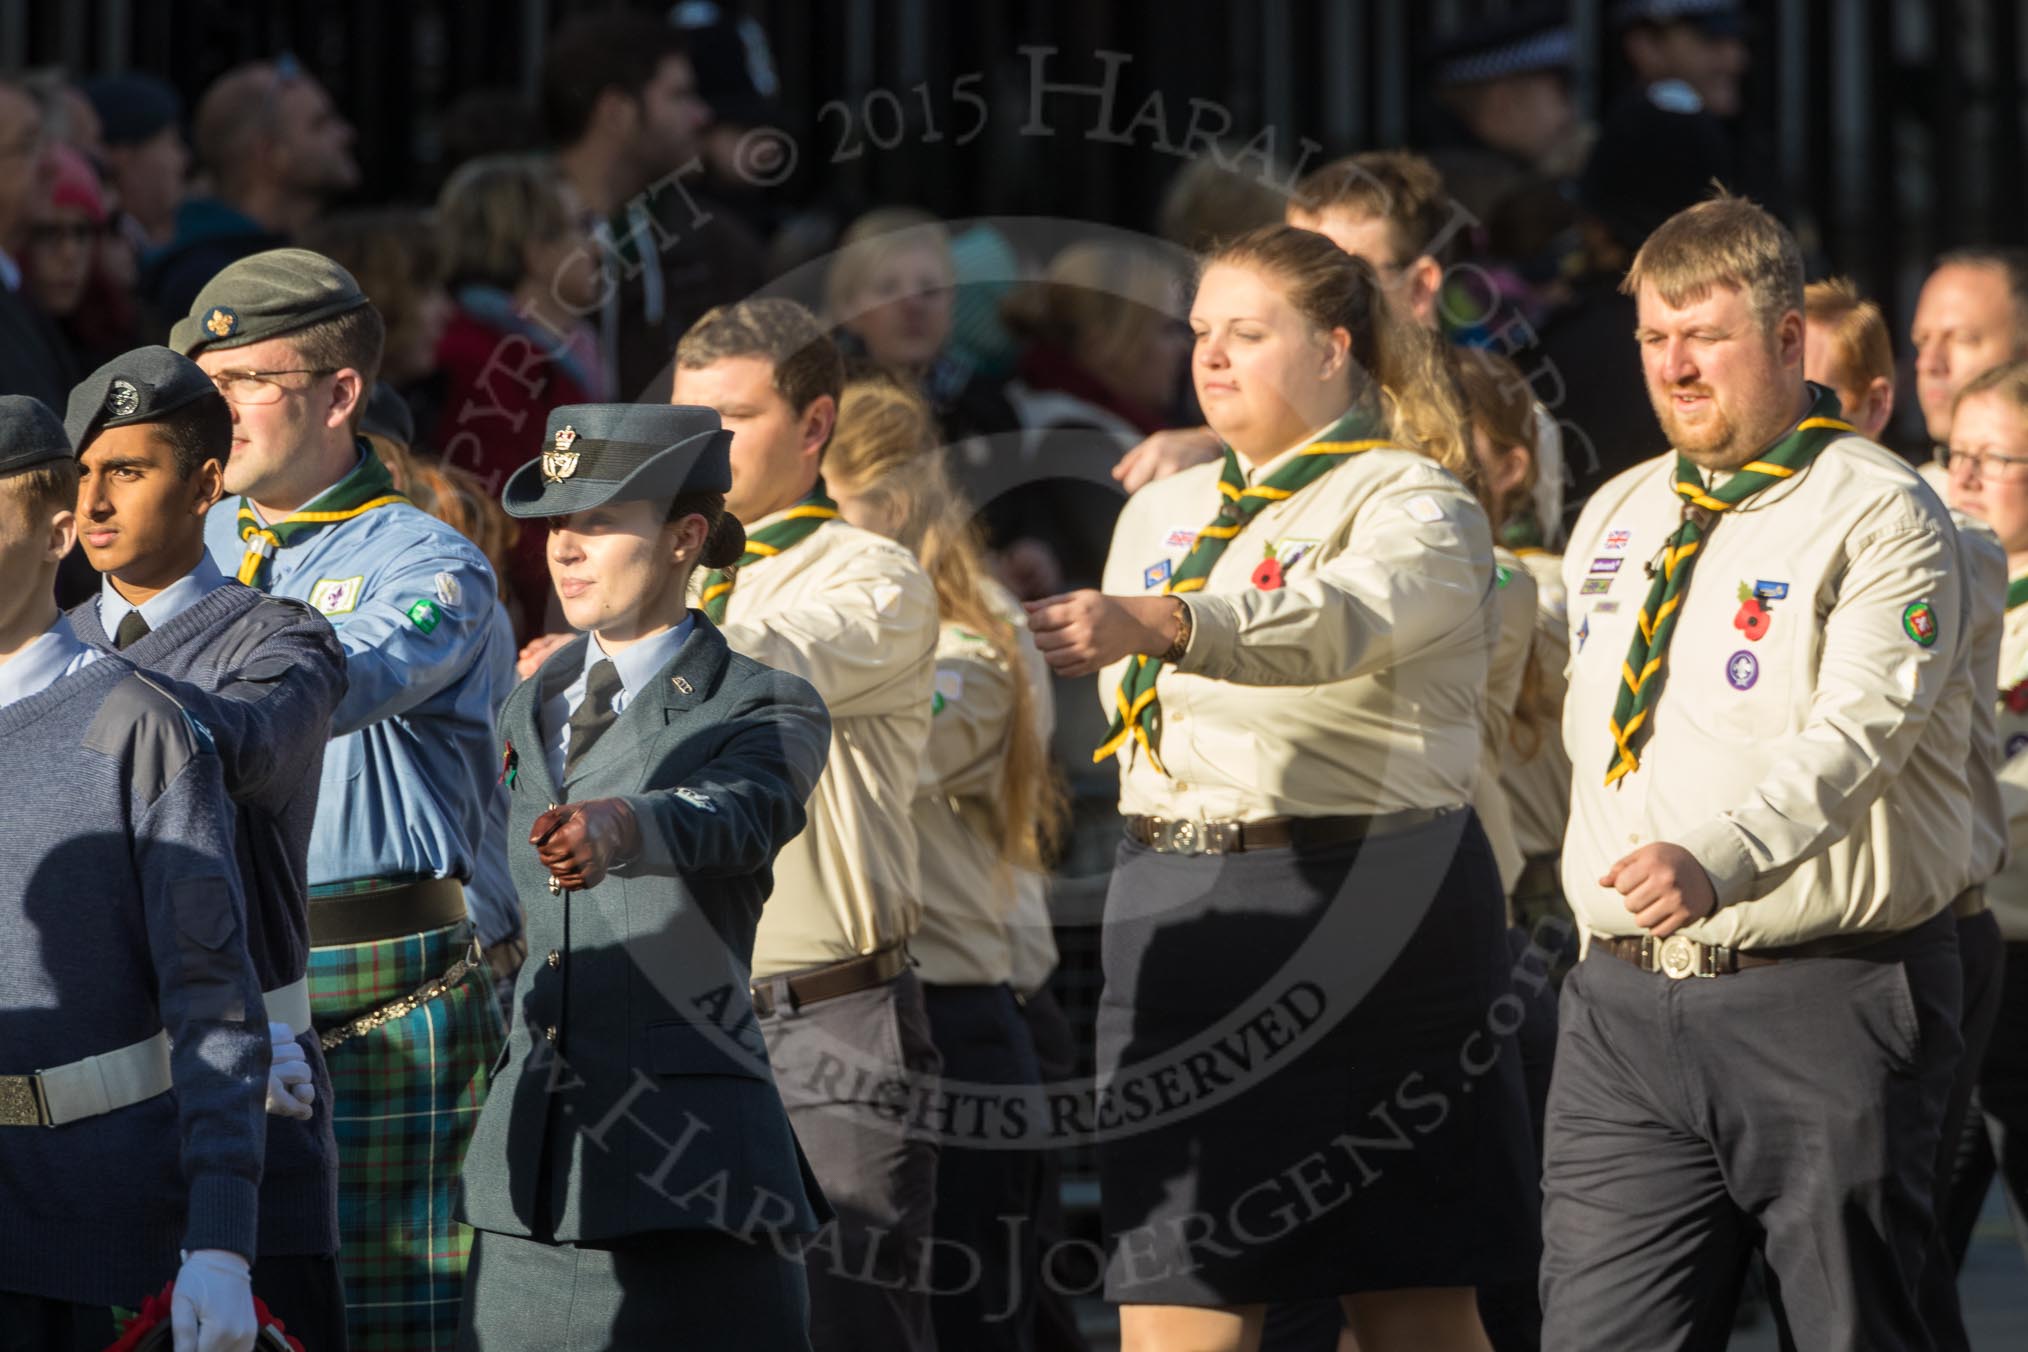 March Past, Remembrance Sunday at the Cenotaph 2016: M33 Scout Association.
Cenotaph, Whitehall, London SW1,
London,
Greater London,
United Kingdom,
on 13 November 2016 at 13:18, image #2841